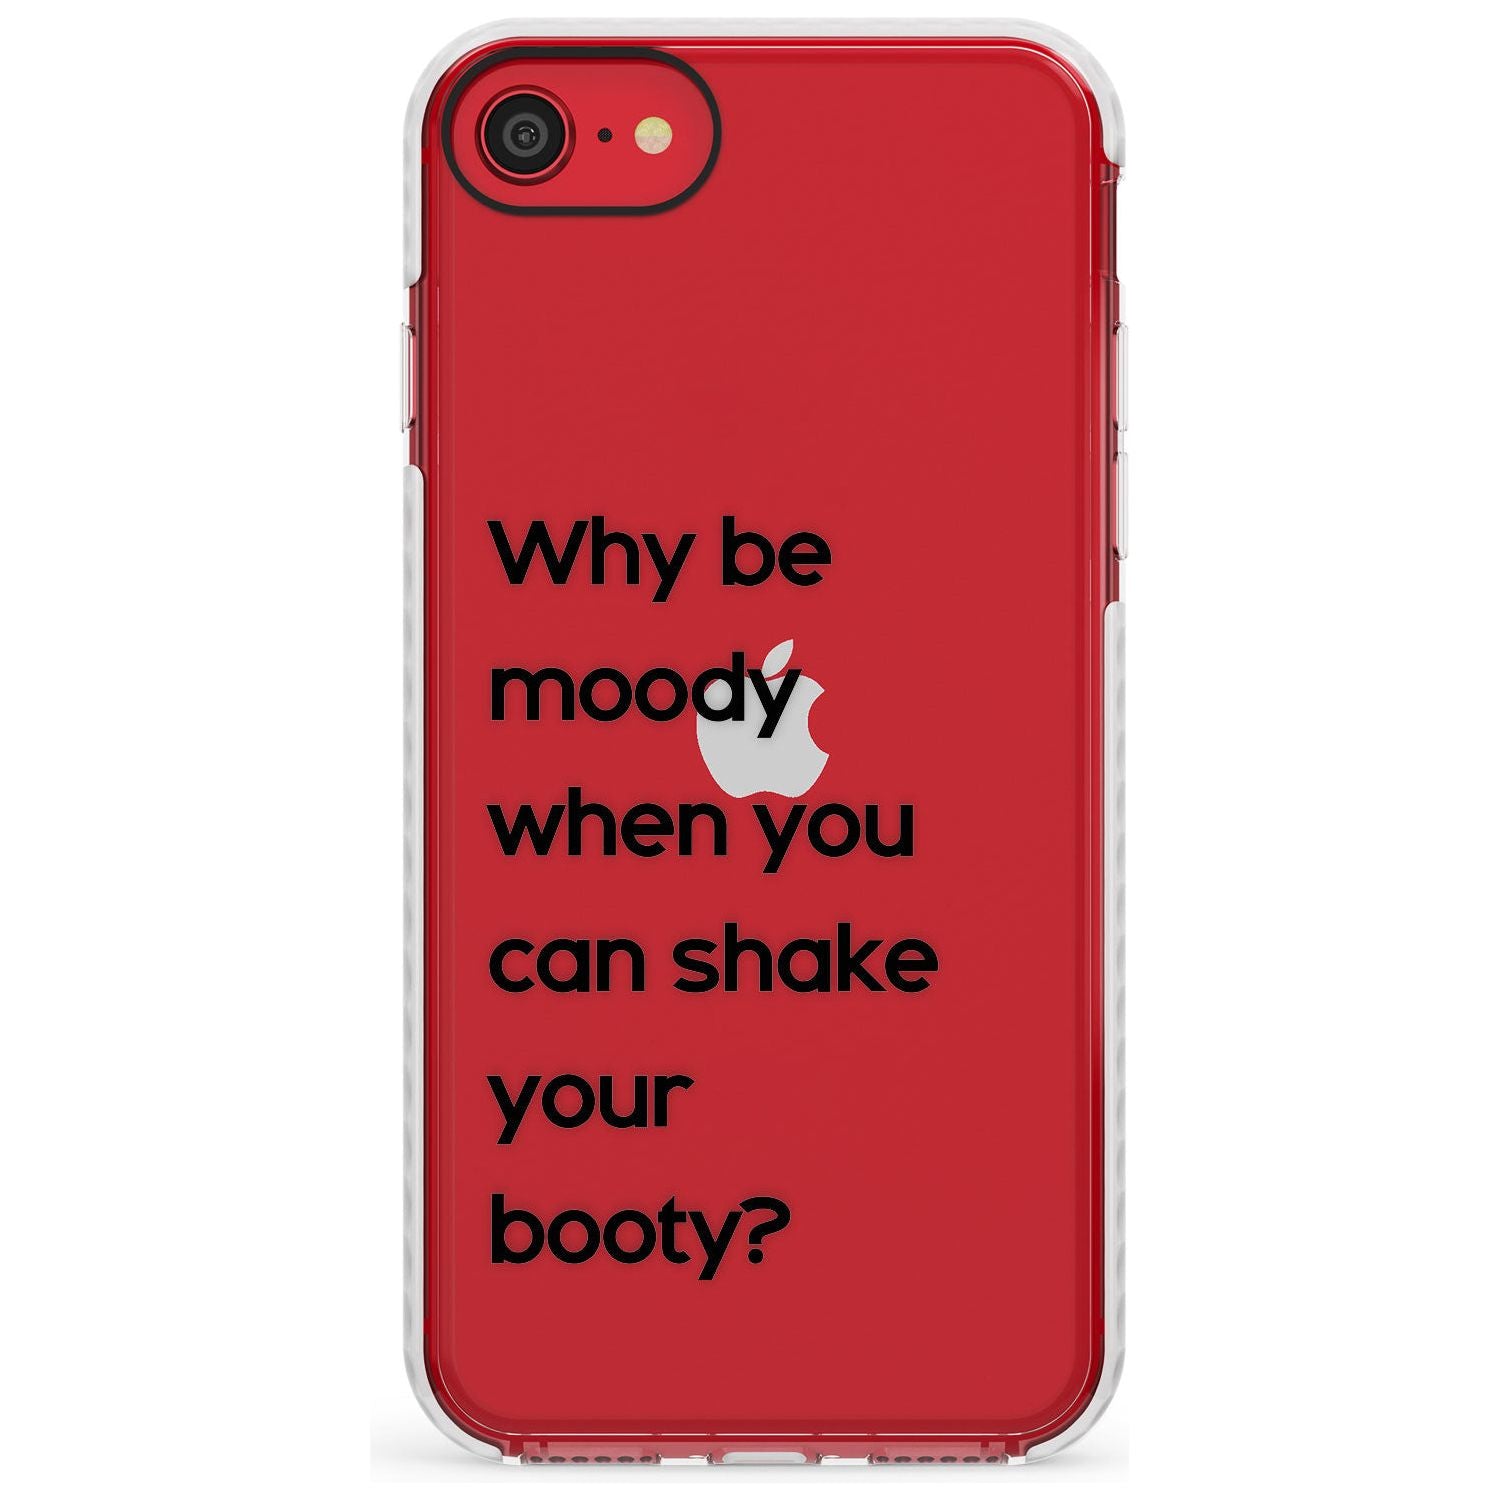 Why be moody? Slim TPU Phone Case for iPhone SE 8 7 Plus